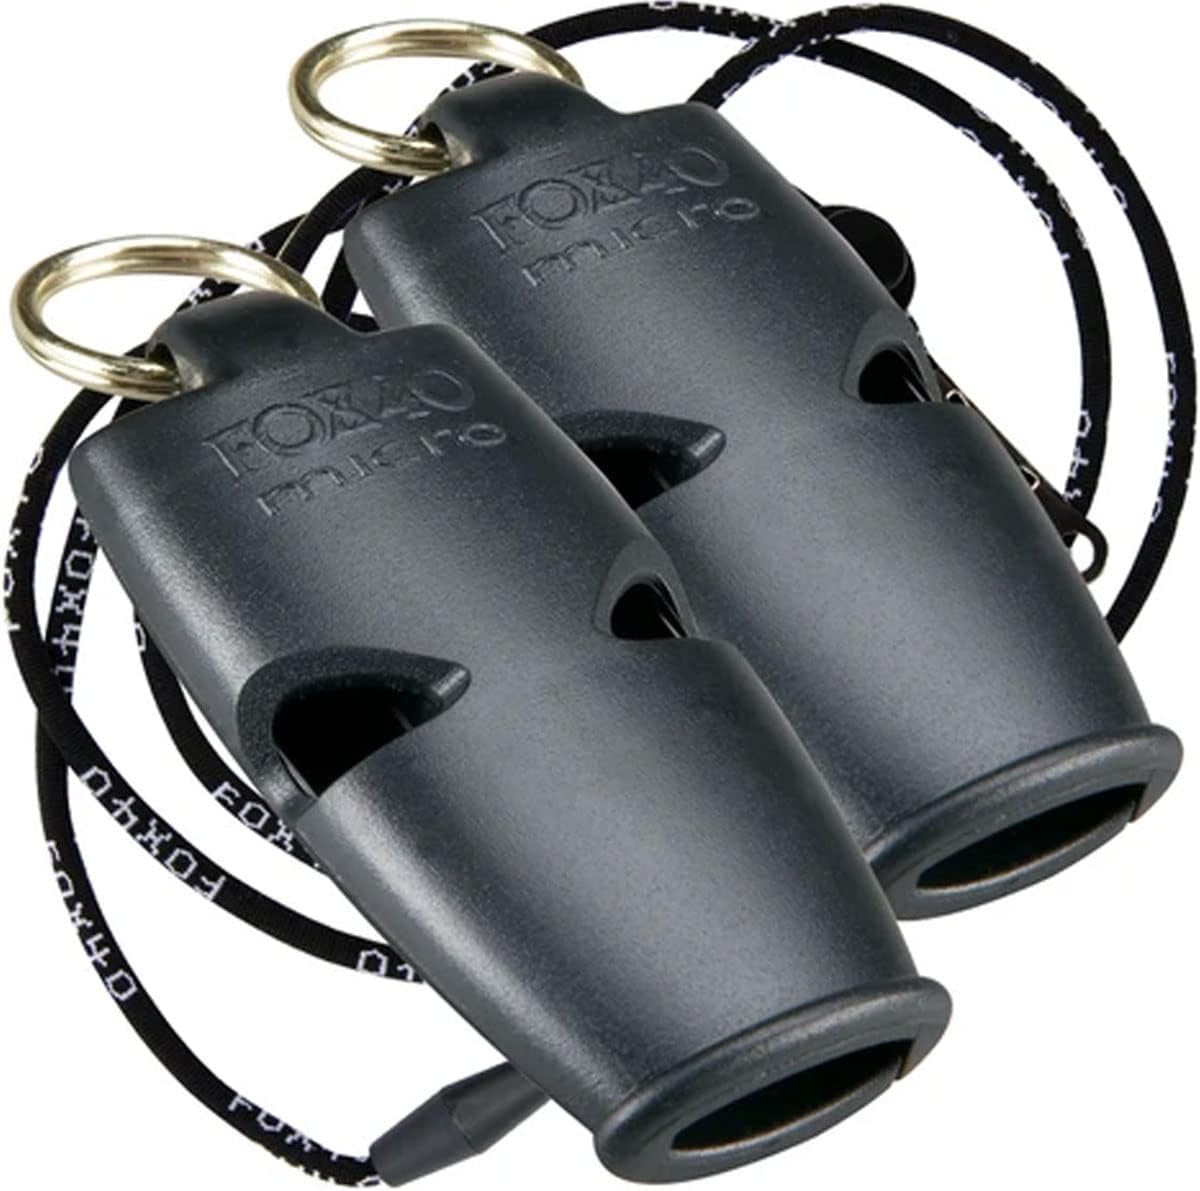 Fox 40 Black Micro Whistle with Lanyard #9512-0008, Pack of 2